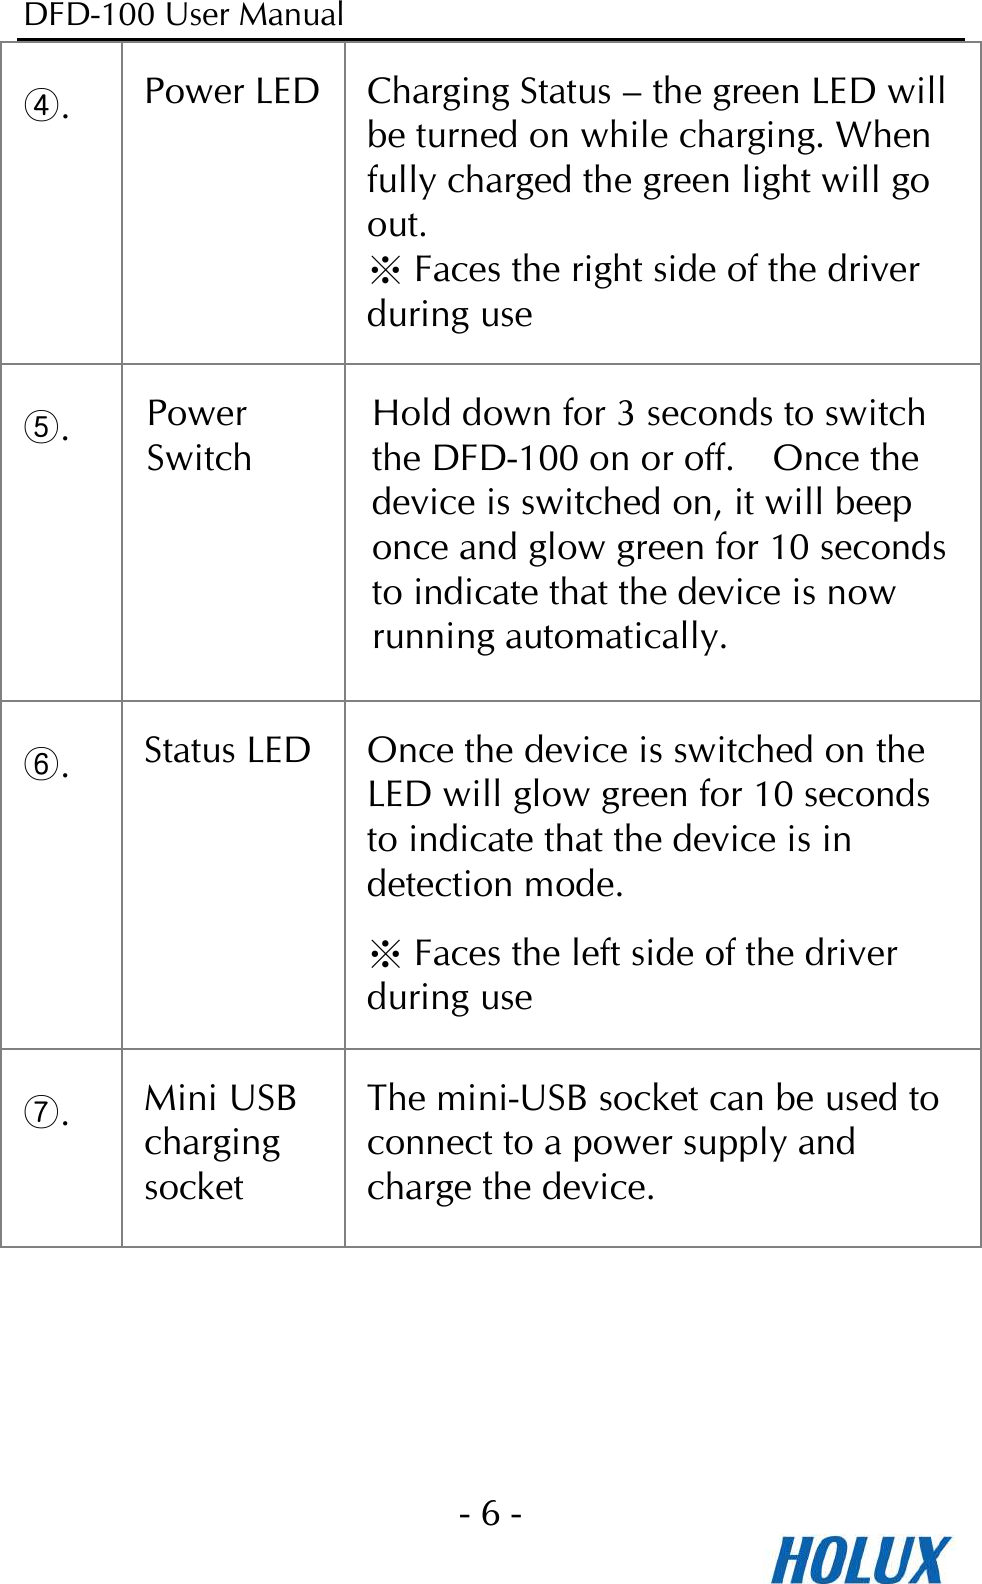 DFD-100 User Manual - 6 -  ④. Power LED Charging Status – the green LED will   be turned on while charging. When fully charged the green light will go out. ※ Faces the right side of the driver during use ⑤. Power Switch Hold down for 3 seconds to switch the DFD-100 on or off.    Once the device is switched on, it will beep once and glow green for 10 seconds to indicate that the device is now running automatically. ⑥. Status LED Once the device is switched on the LED will glow green for 10 seconds to indicate that the device is in detection mode. ※ Faces the left side of the driver during use ⑦. Mini USB charging socket The mini-USB socket can be used to connect to a power supply and charge the device.   